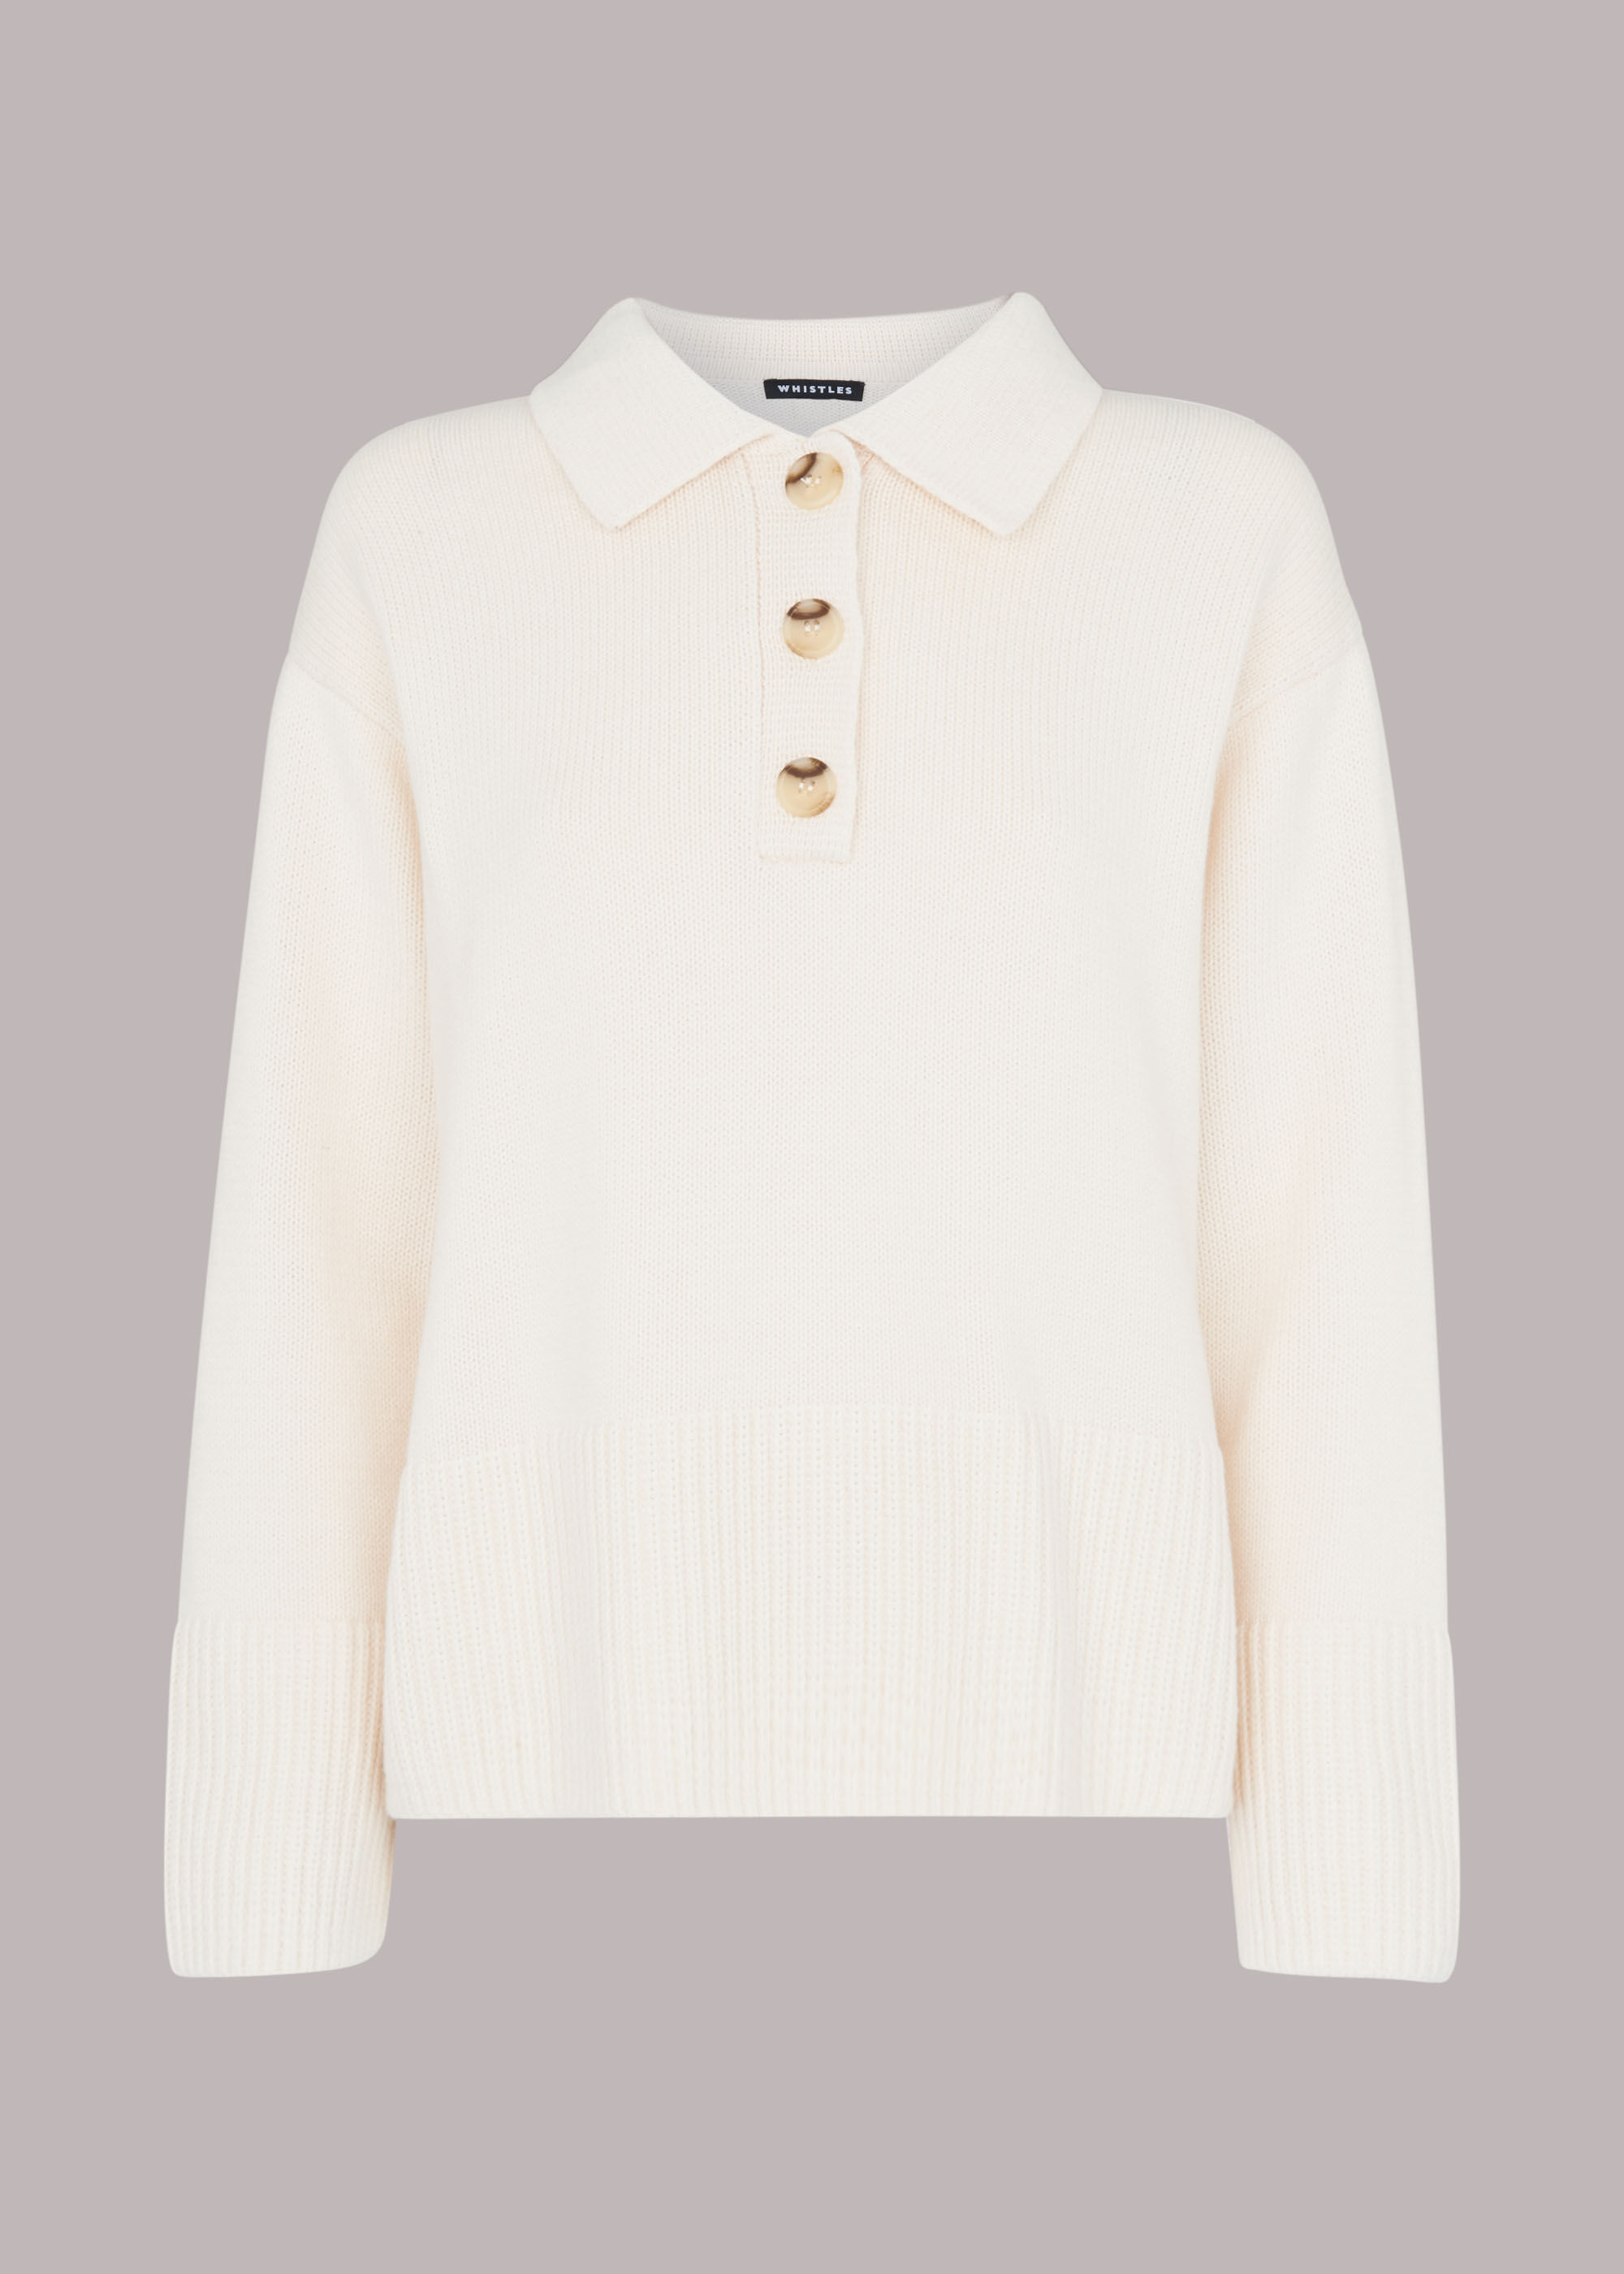 TODAYFUL - louren / front button polo knitの+giftsmate.net